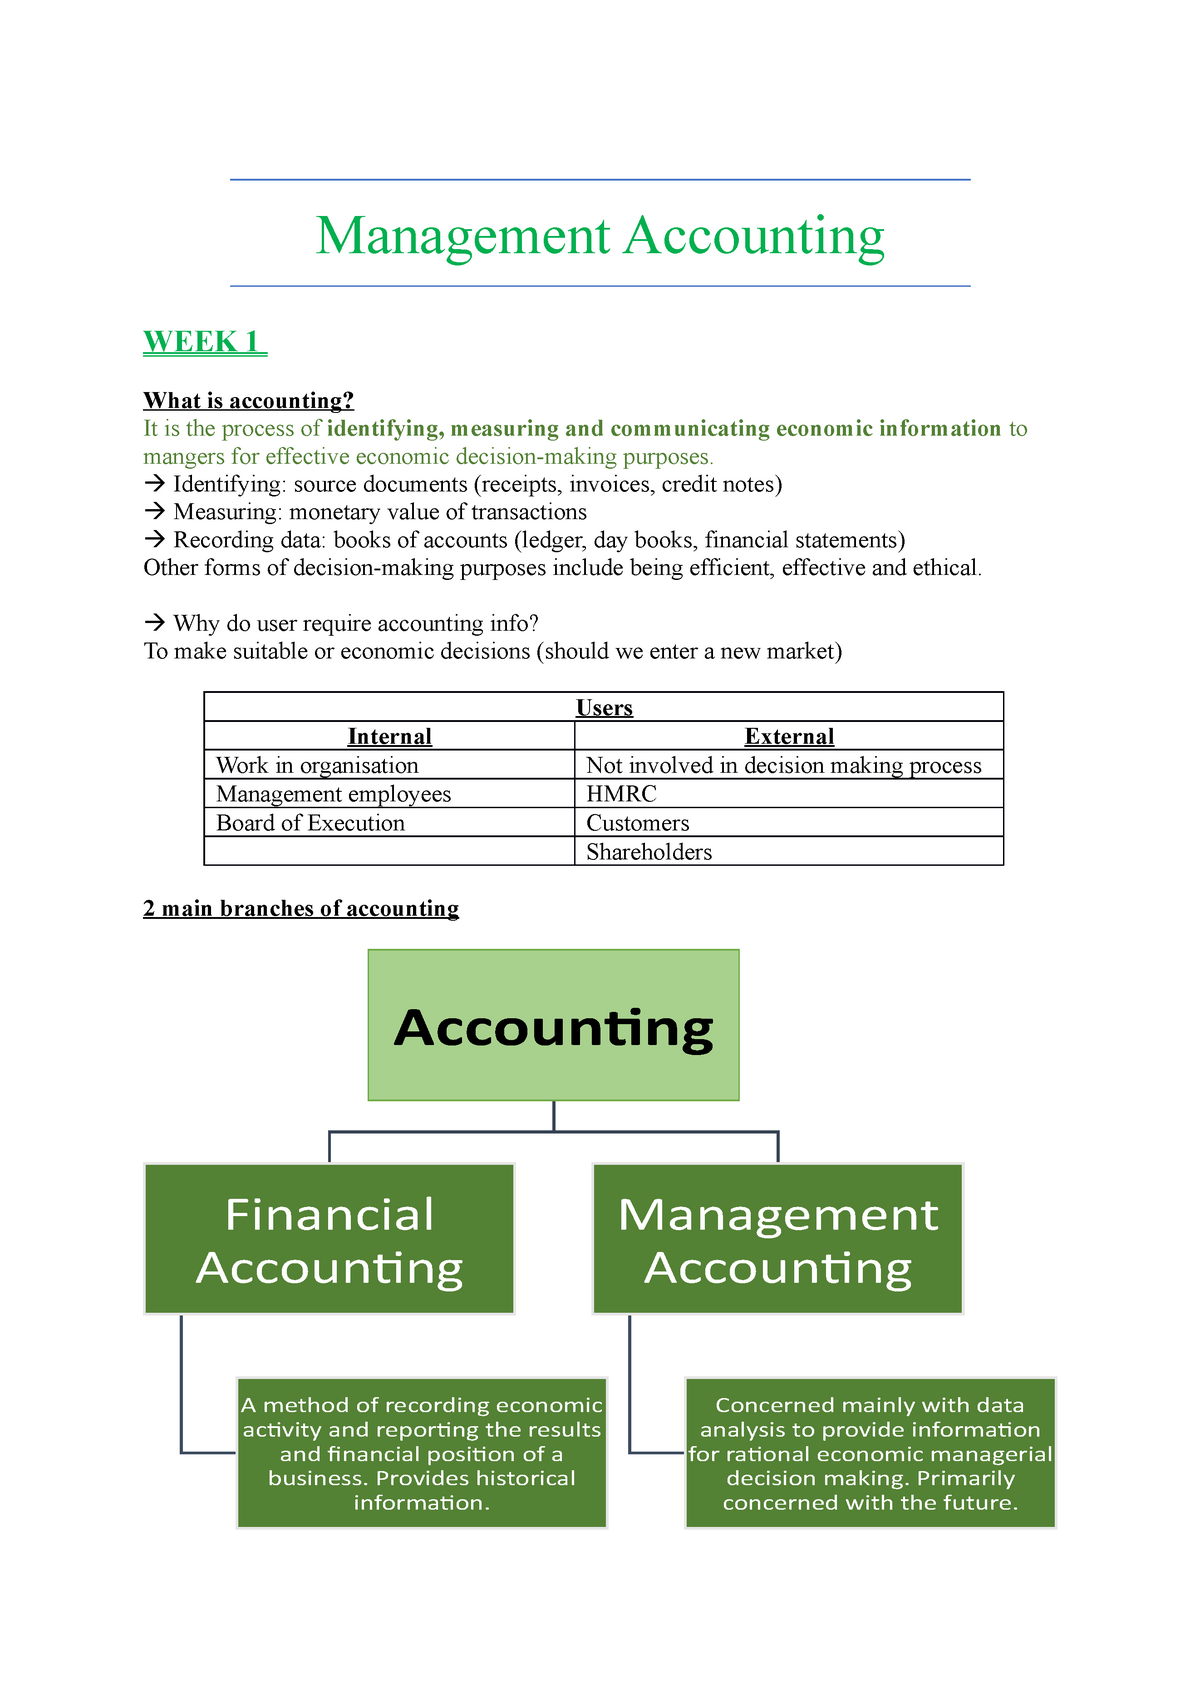 Management Accounting weeks 1 3 Management Accounting WEEK 1 What